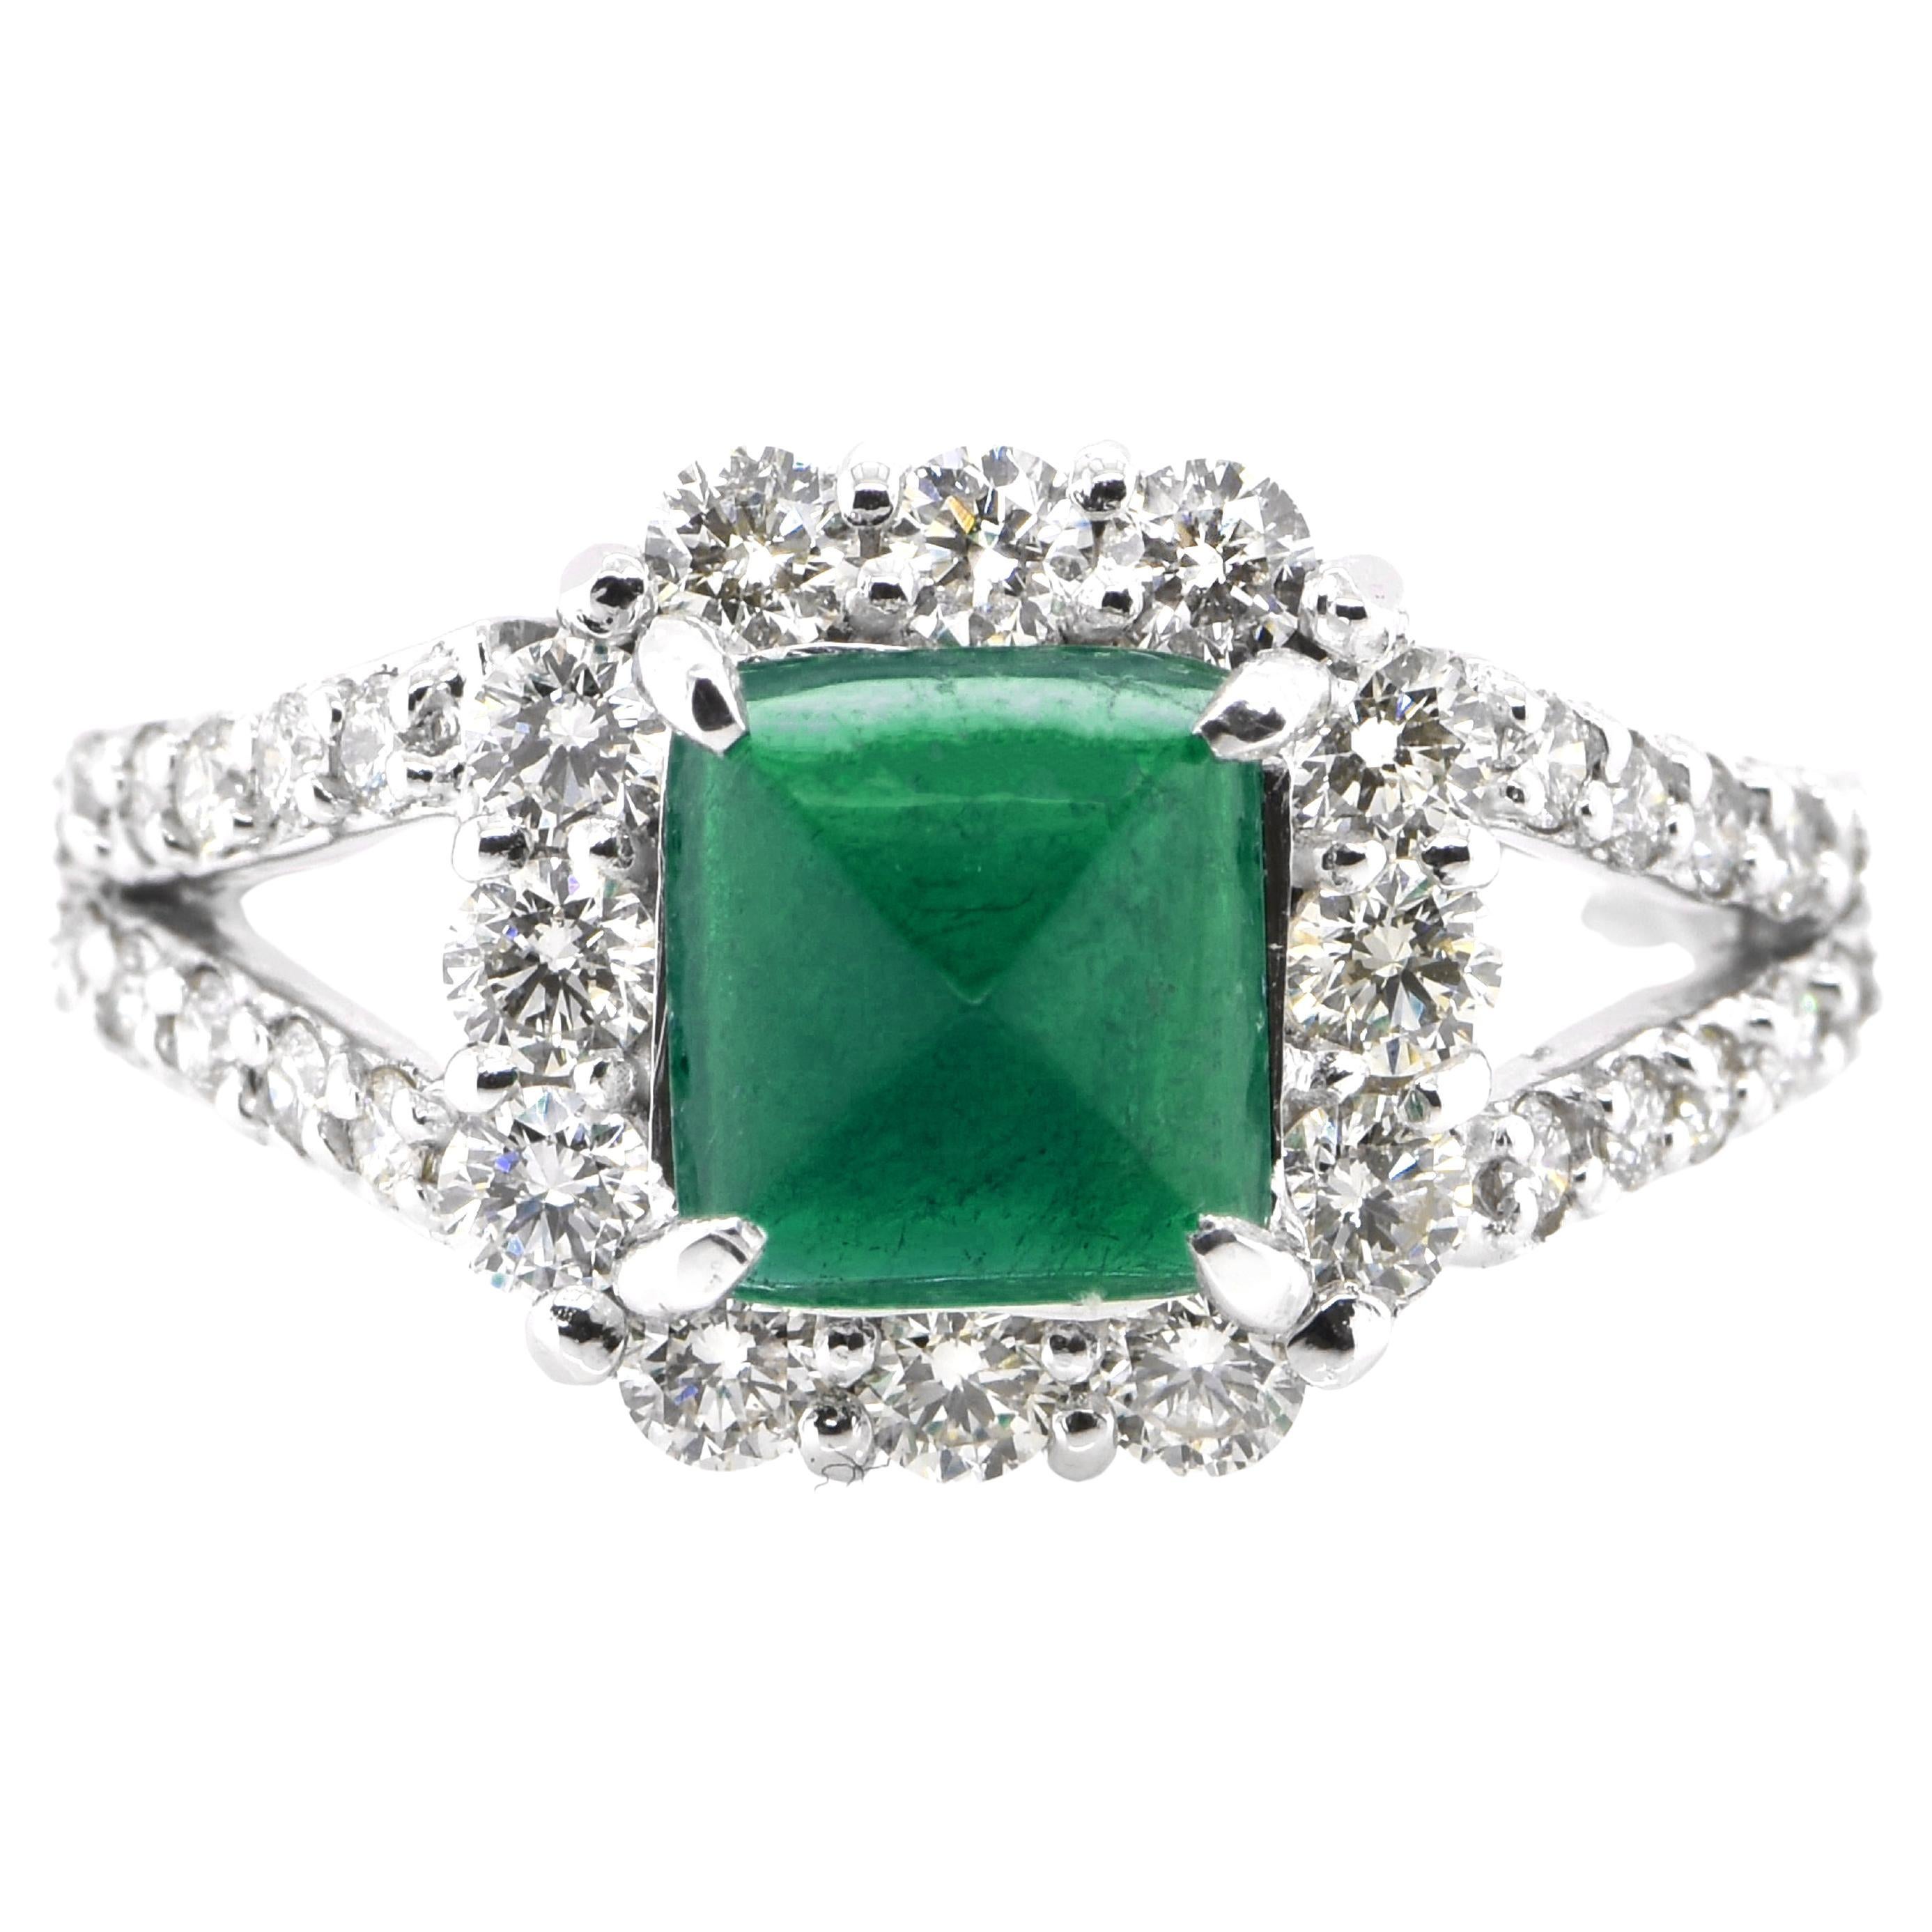 1.35 Carat Natural Emerald Sugarloaf Cabochon and Diamond Ring Set in Platinum For Sale